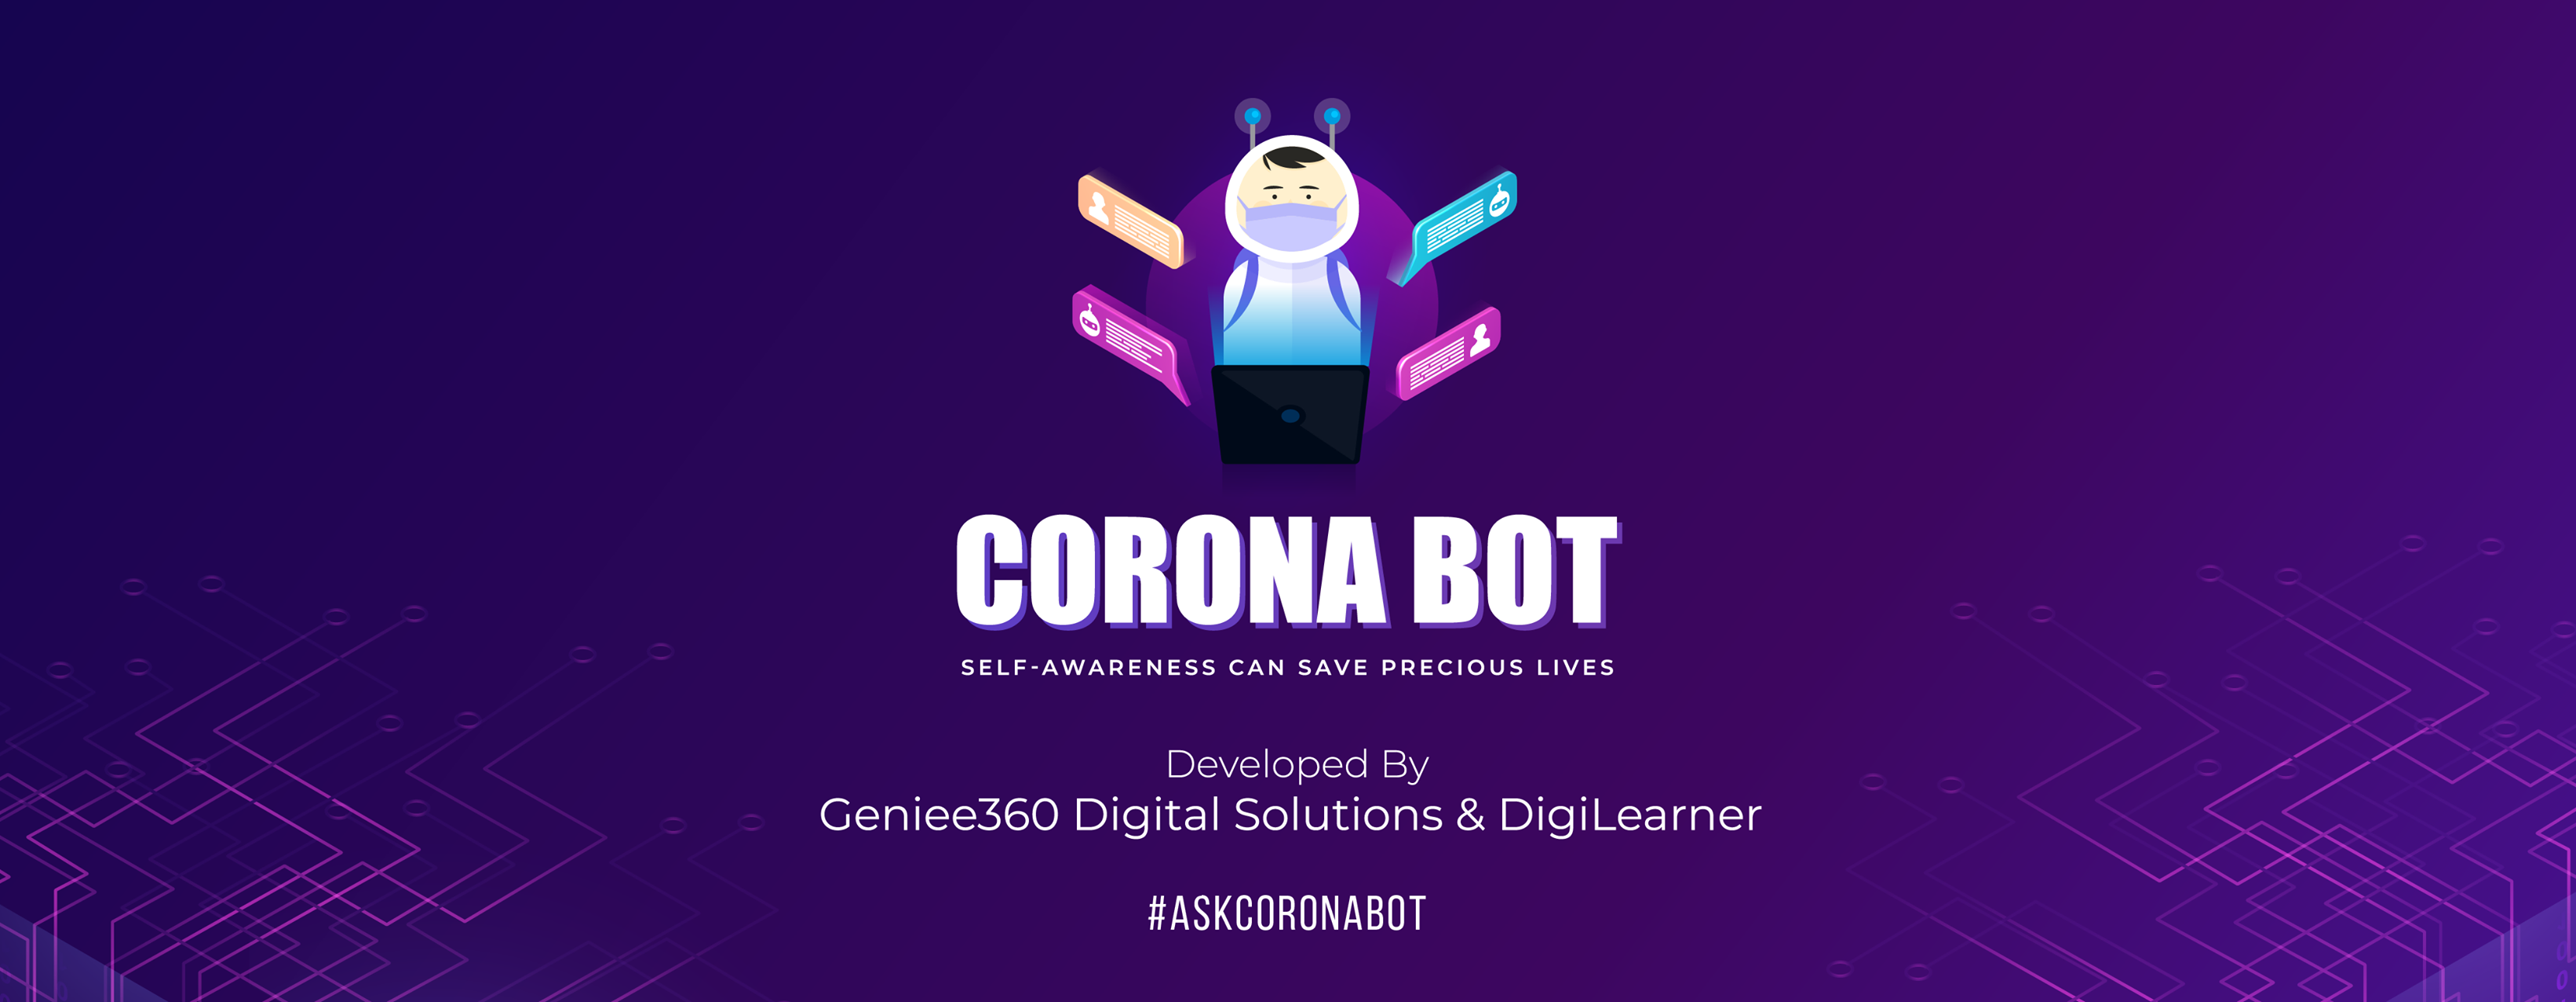 Coronabot- A Chatbot Launched To Assist Covid -19 Emergency-Markedium